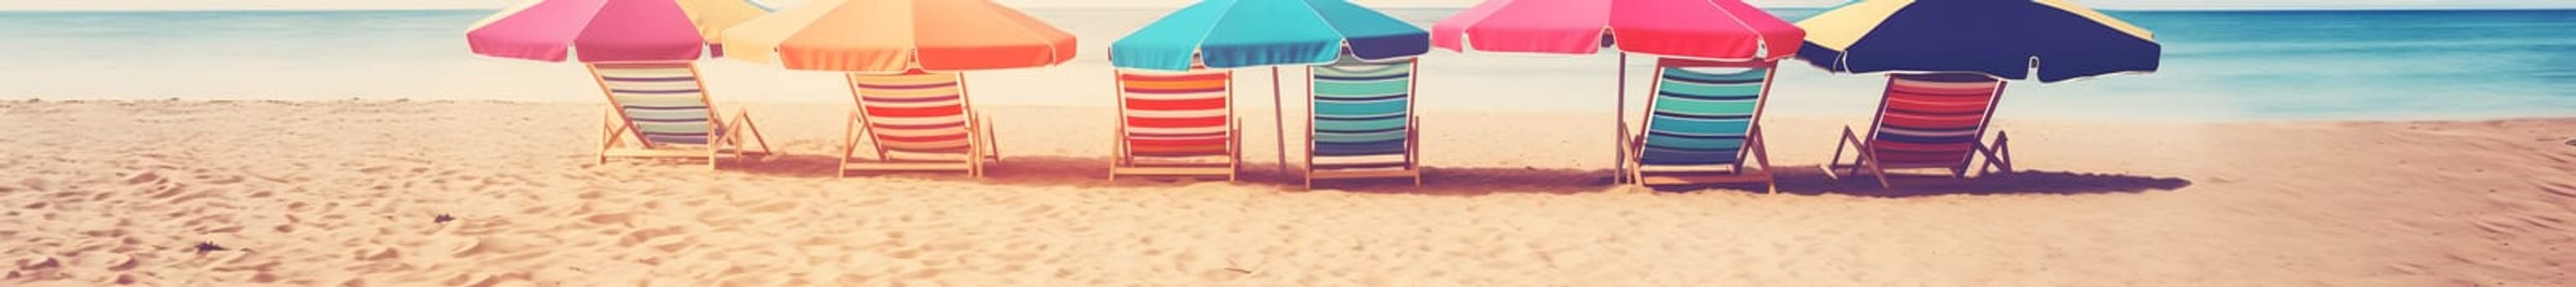 Beach umbrellas with chairs on the sand beach - summer vacation theme header. Neural network generated in May 2023. Not based on any actual person, scene or pattern.